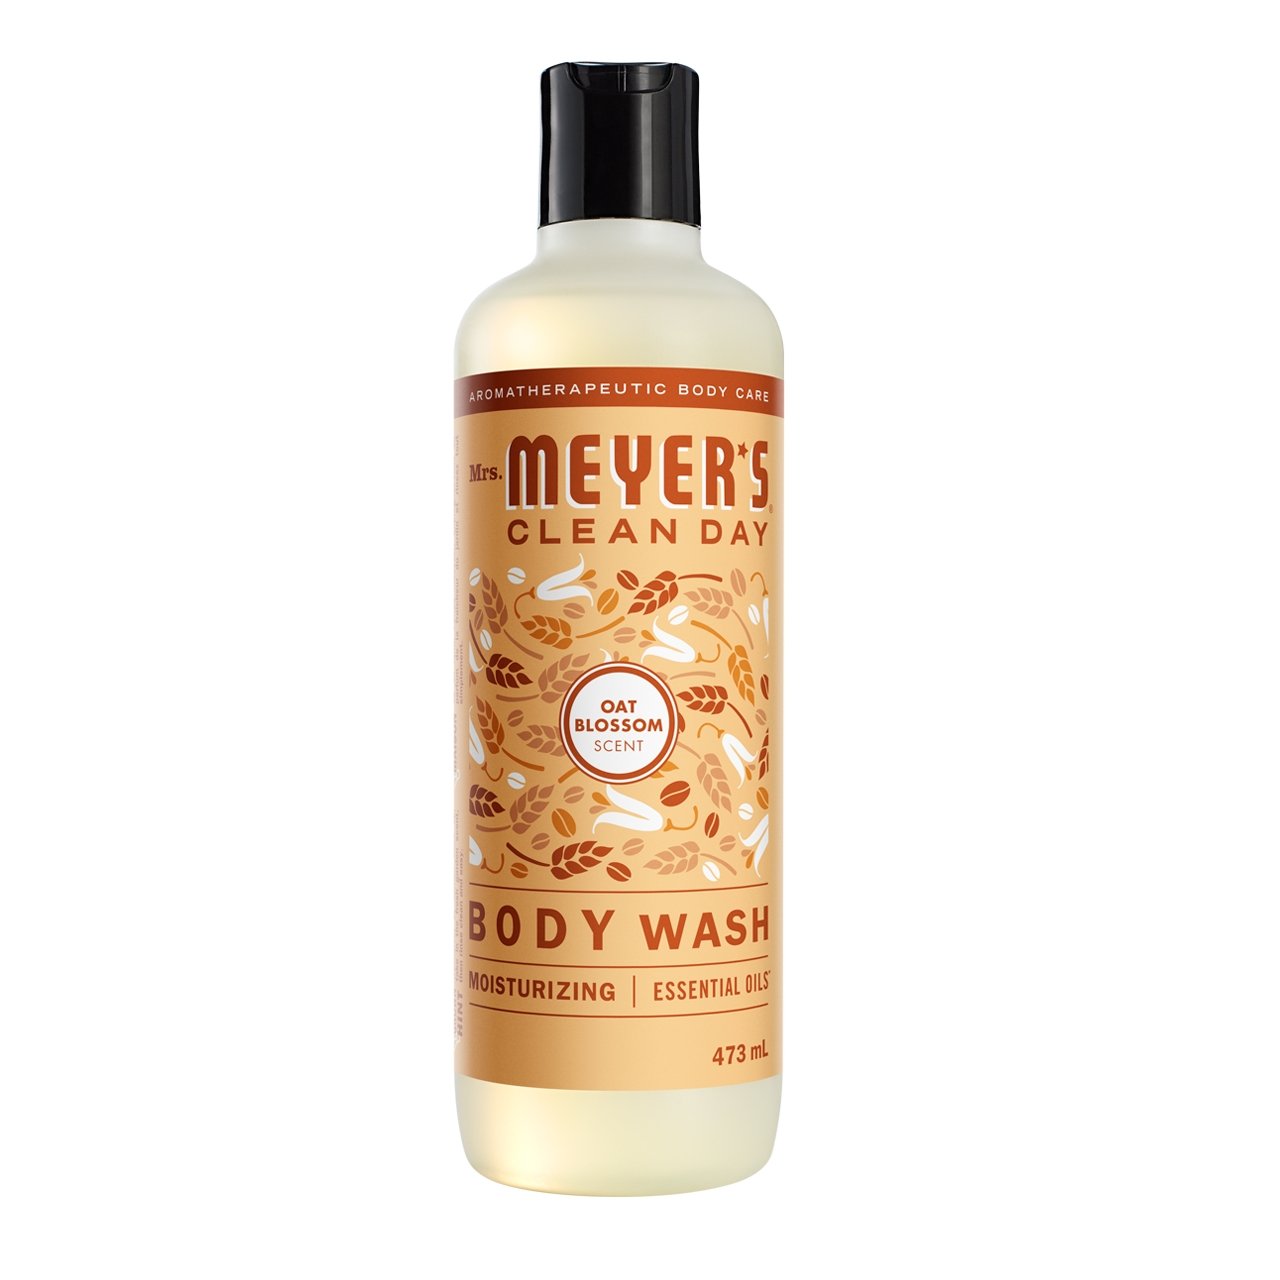 Oat Blossom Body Wash by Mrs. Myers